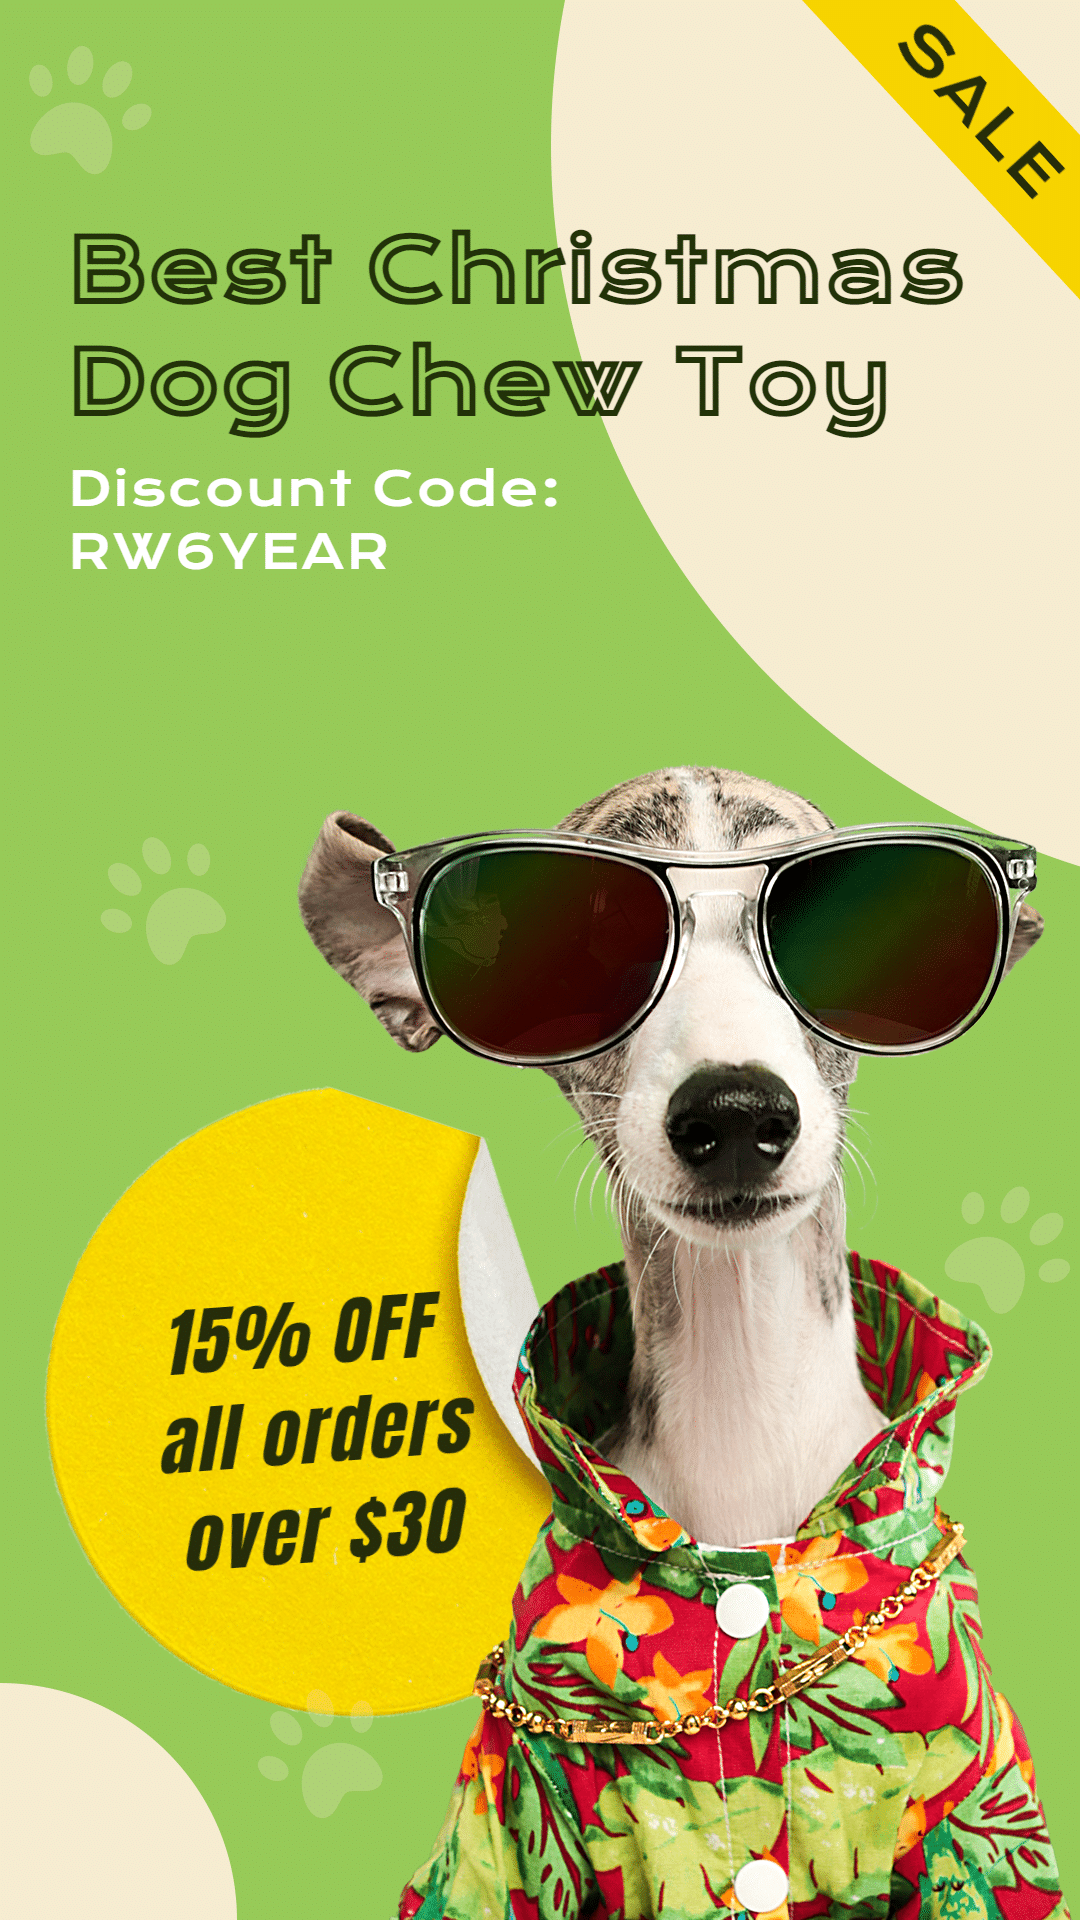 Pure Green Background Christmas Dog Chew Toy Promotion Ecommerce Story预览效果